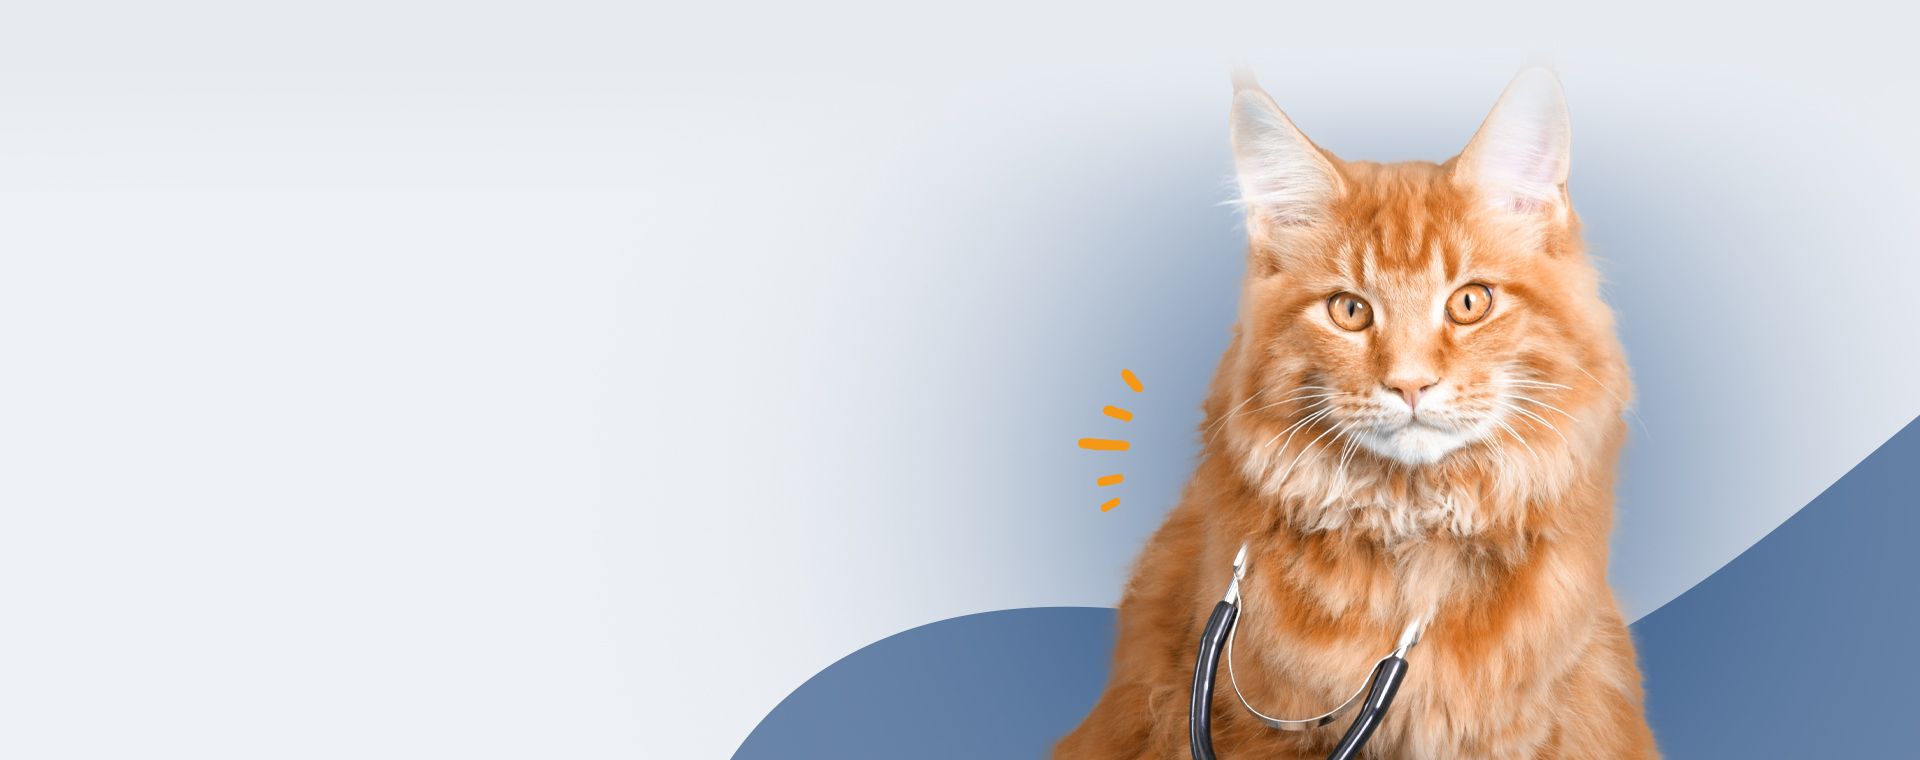 orange furry cat with a stethoscope on his neck